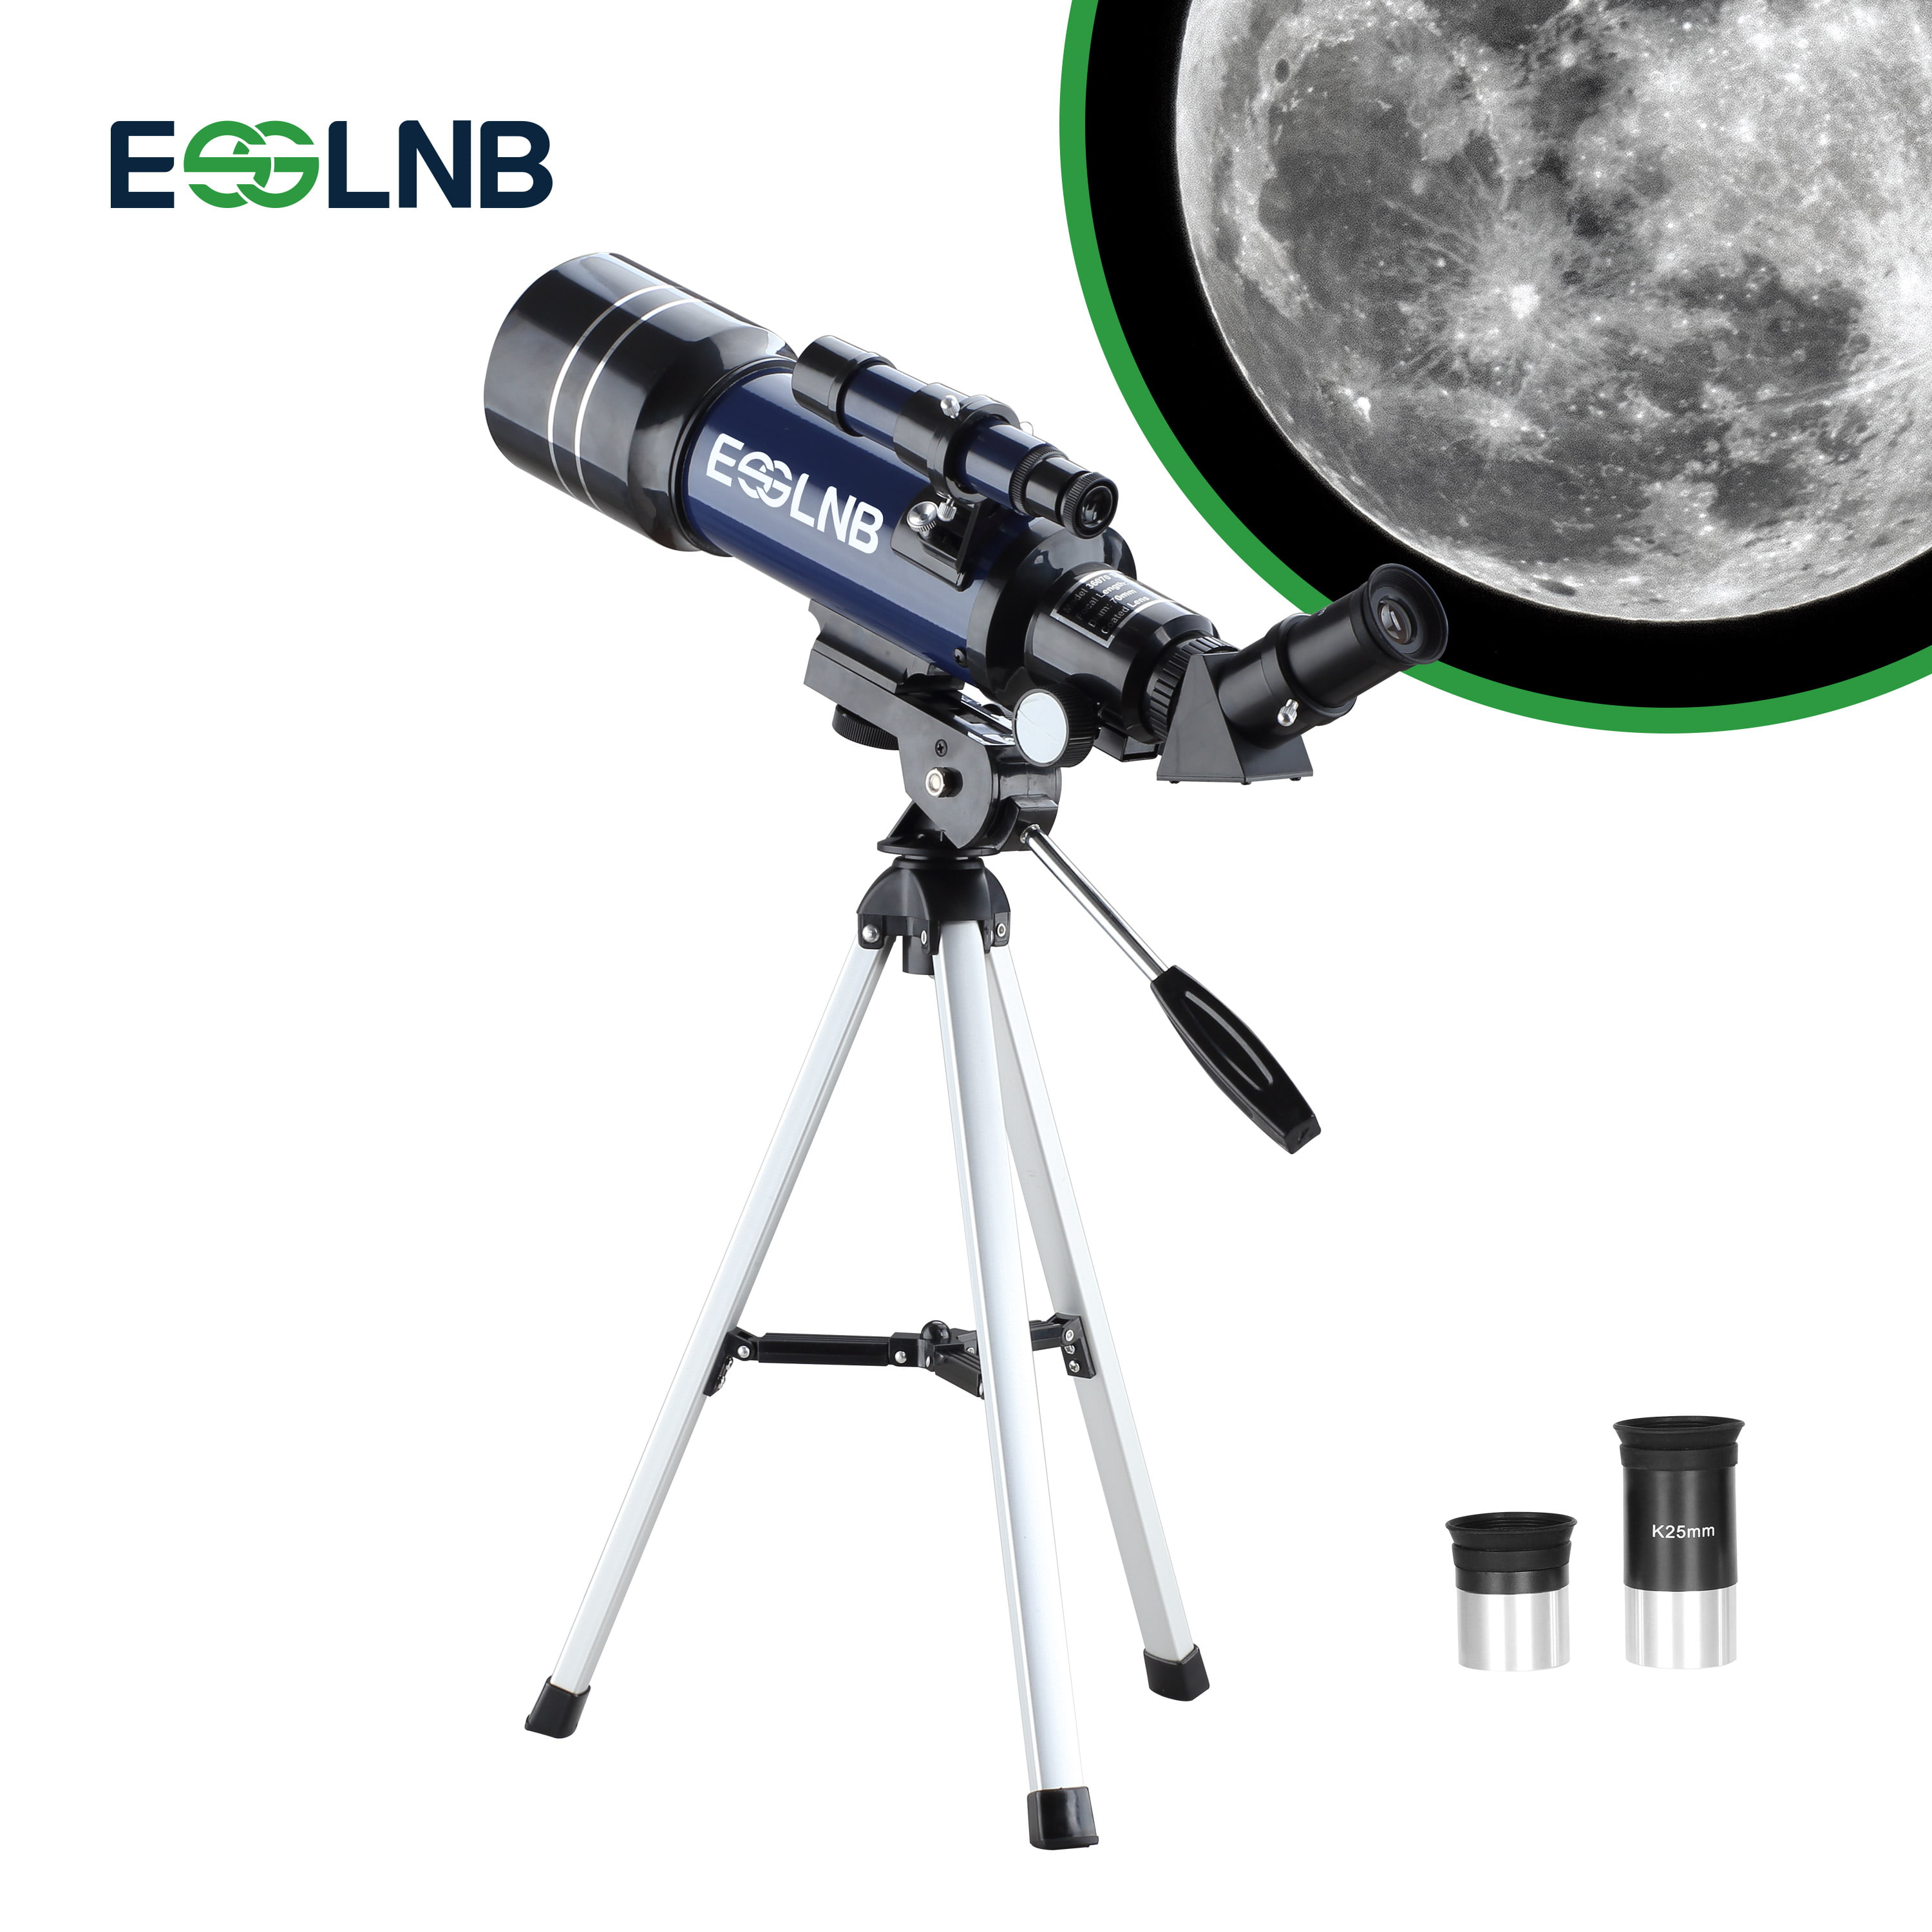 GGPUS Automatic Star Search Portable Travel Telescope with Tripod Telescope for Kids Adults Astronomy Beginners Refractor Telescope for Astronomy Focal Length 660Mm 